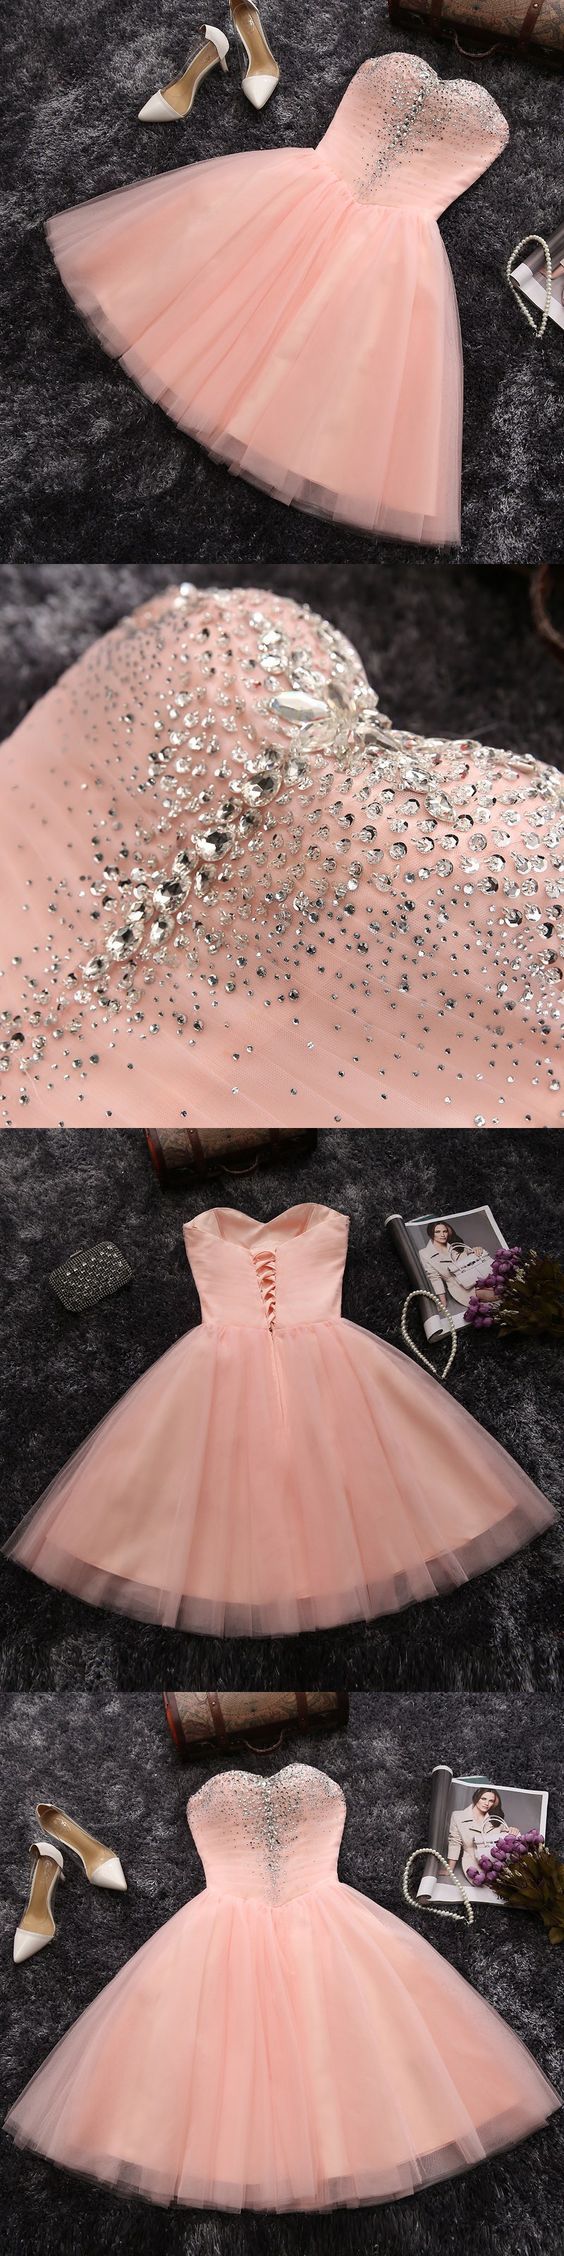 Charming Prom Dress,tulle Pink Prom Dress,short Prom Dresses,cute Party Dress M0315